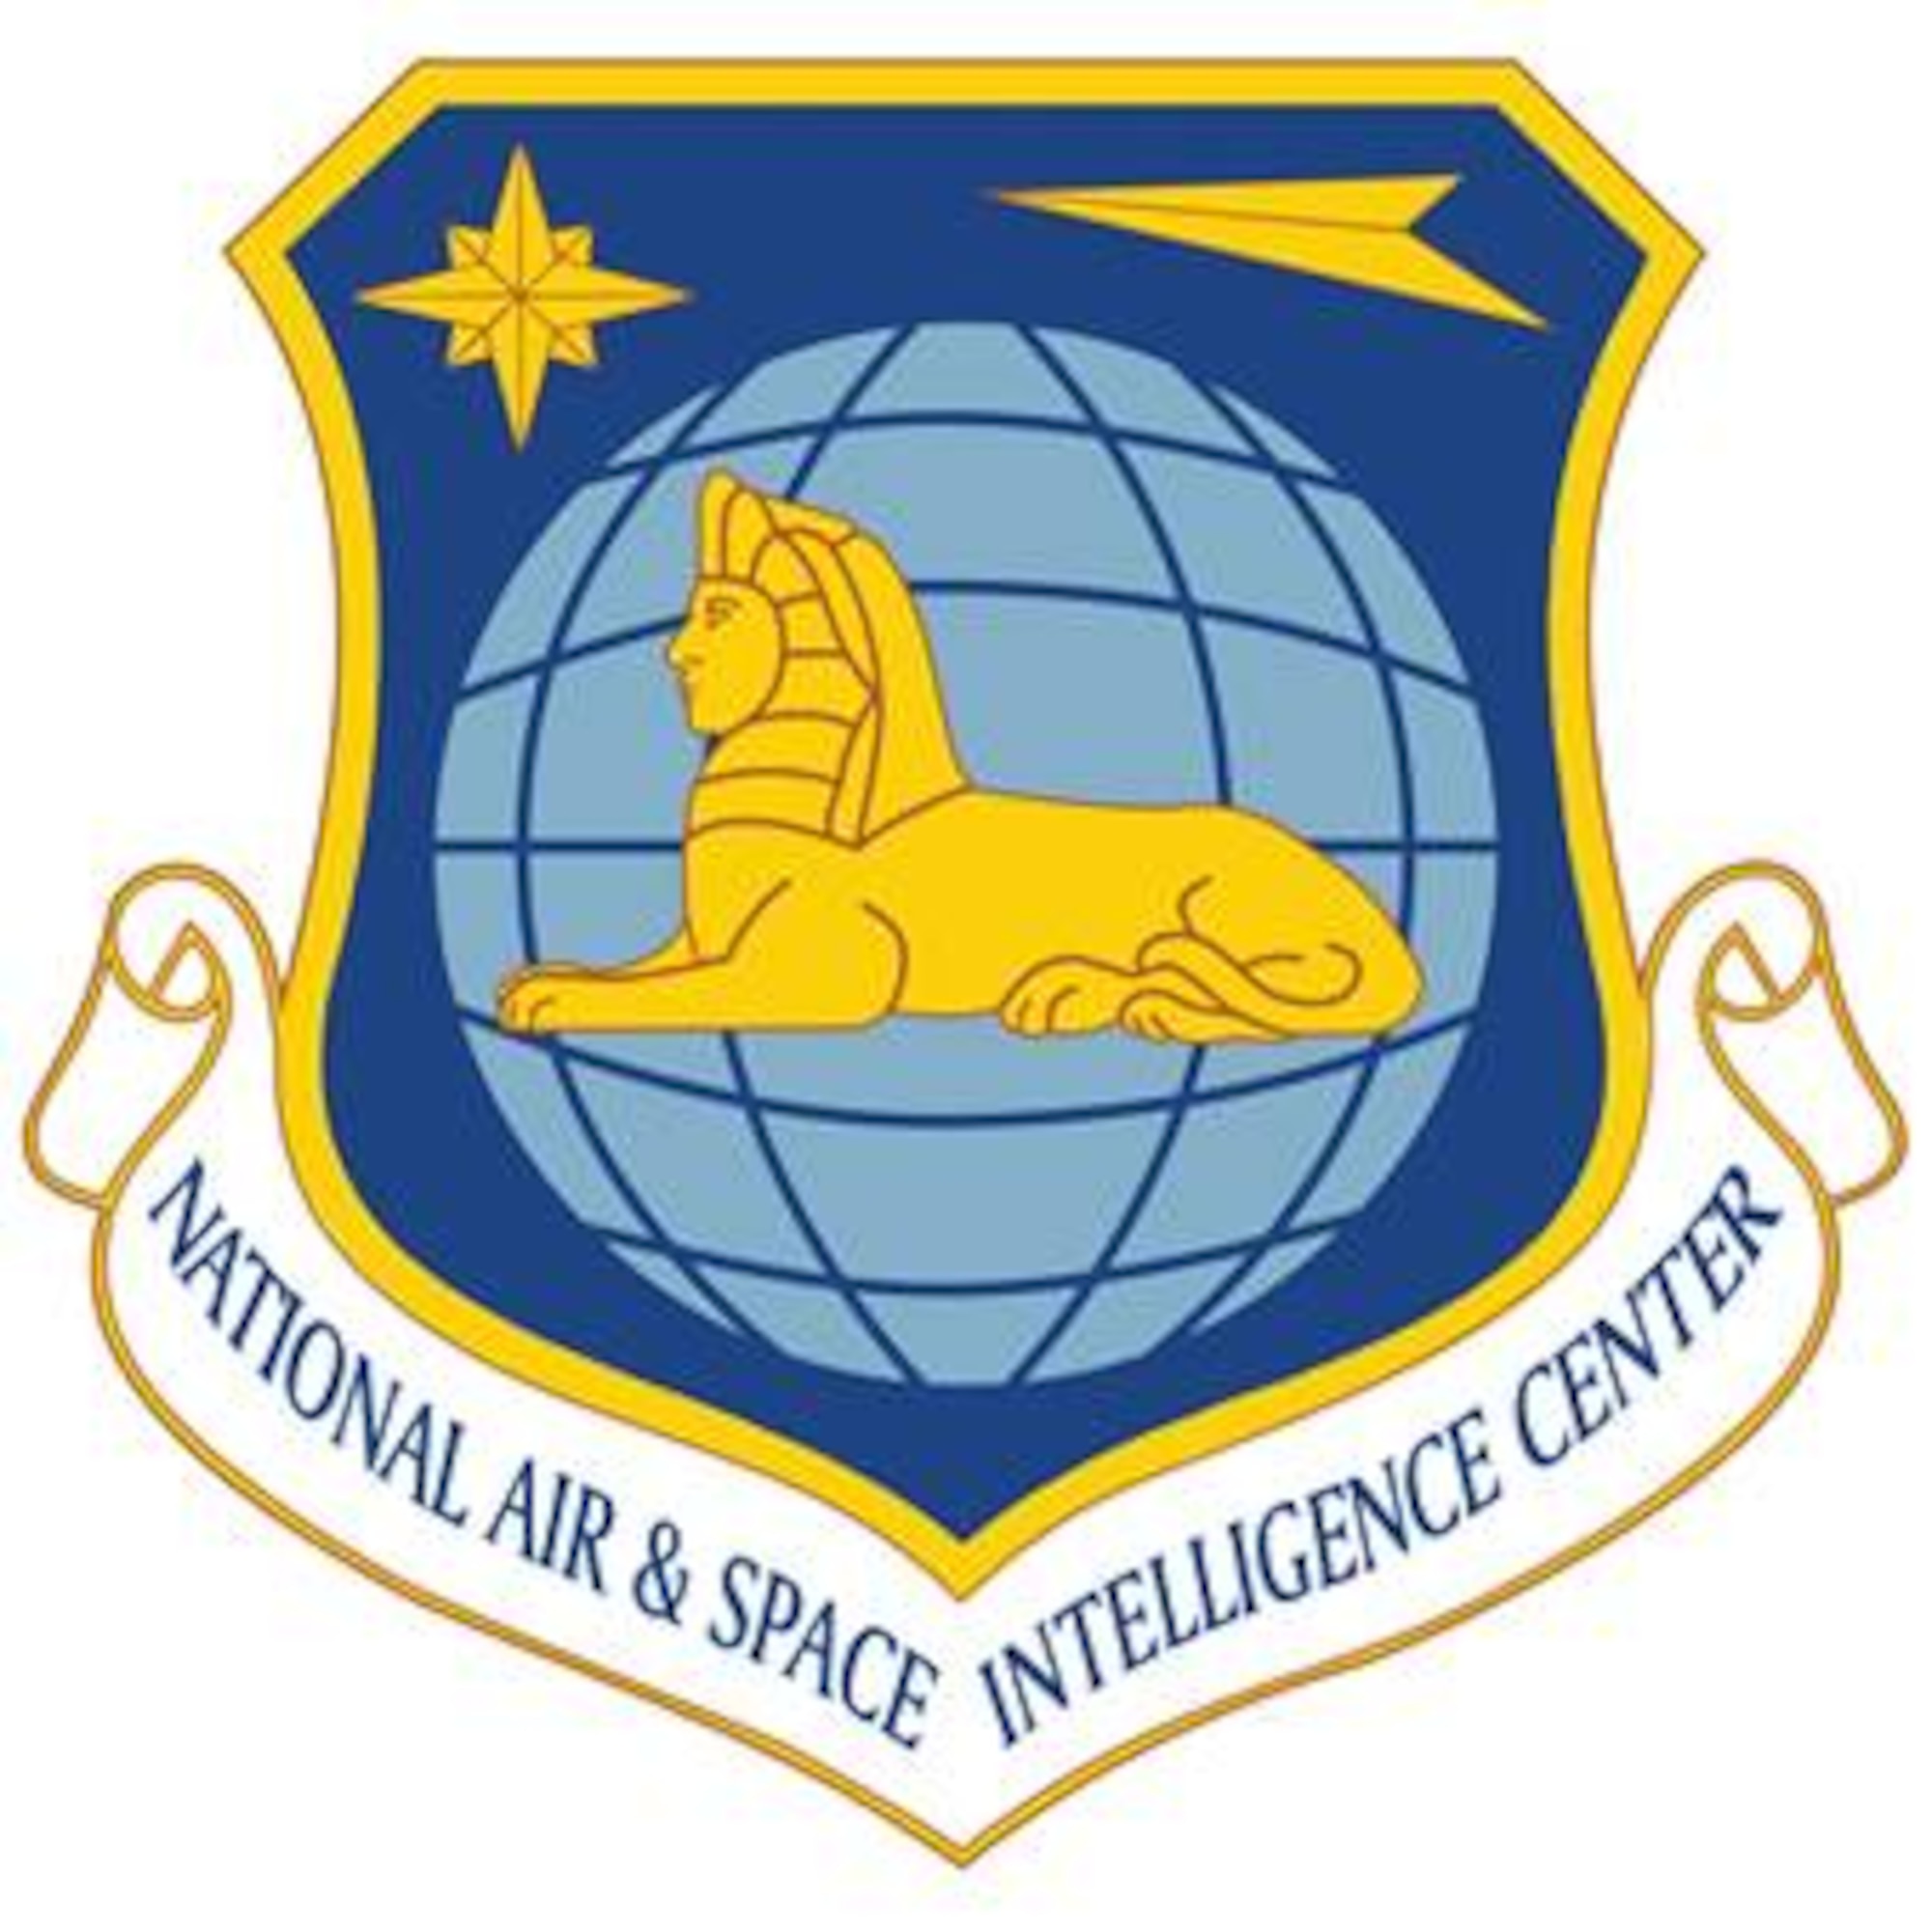 The shield of the National Air and Space Intelligence Center at Wright-Patterson Air Force Base, Ohio.  NASIC is a subordinate unit of the Air Force Intelligence, Surveillance and Reconnaissance Agency at Lackland Air Force Base, Texas.